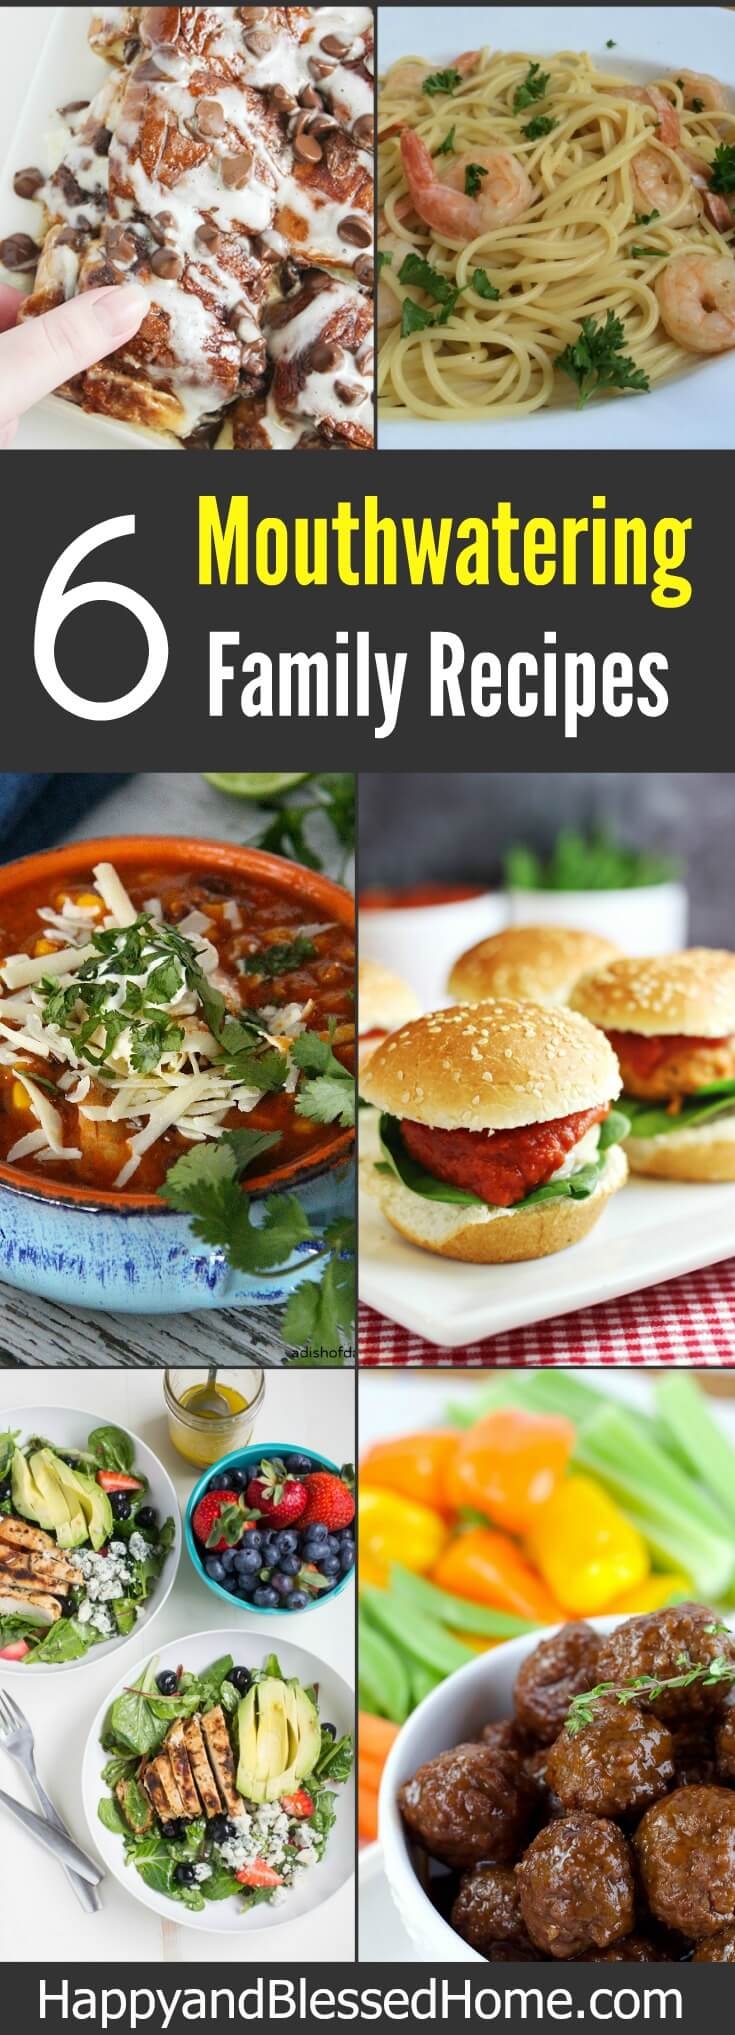 6 Mouthwatering Family Recipes for any time of year - HappyandBlessedHome.com